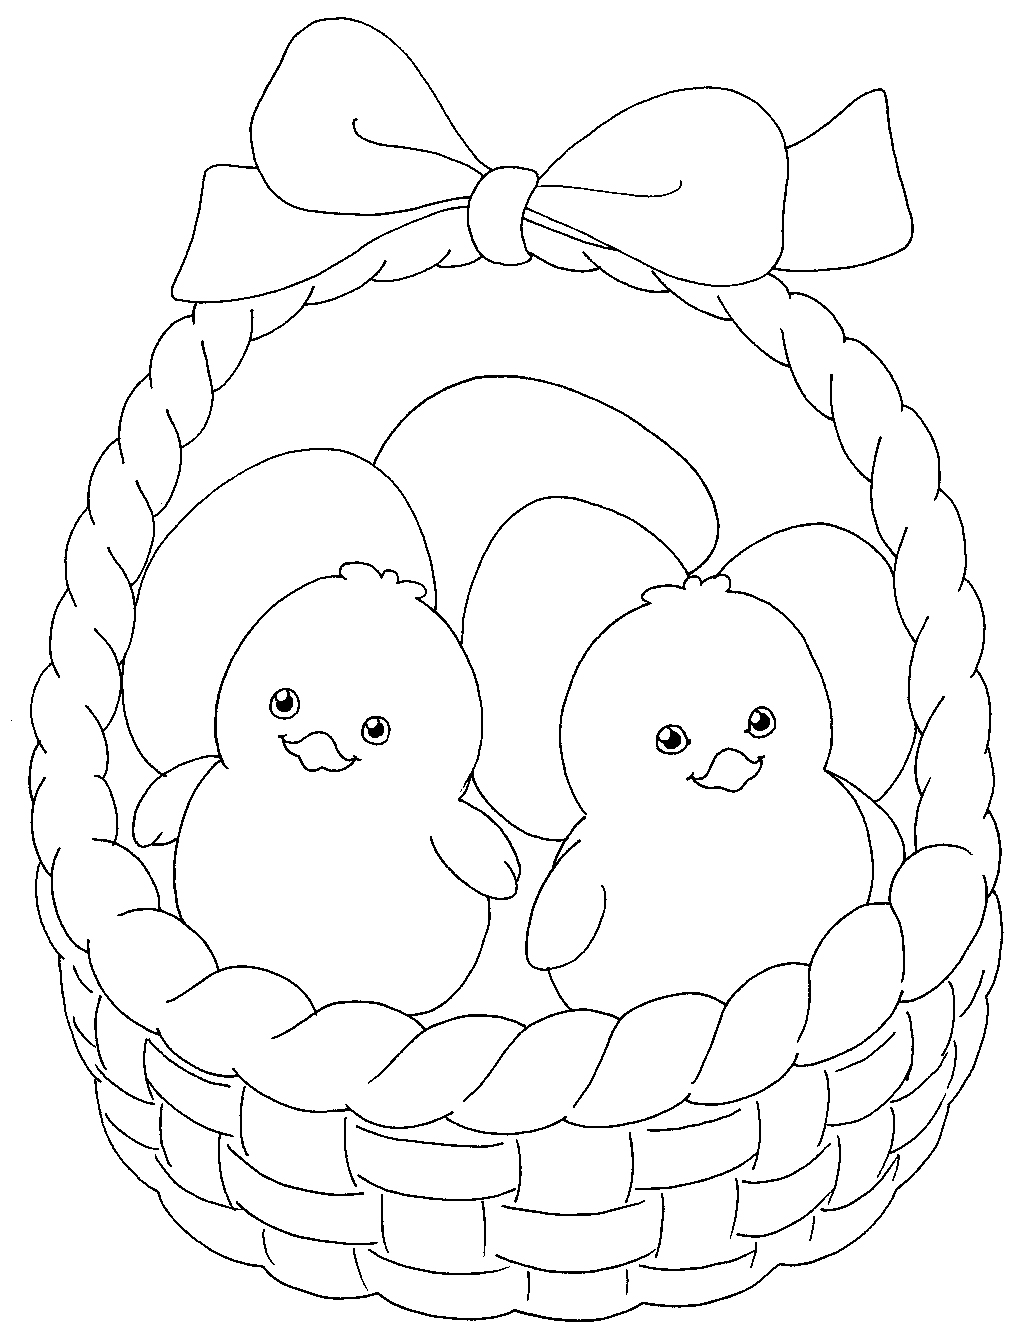 Easy Easter Coloring Pages at GetDrawings | Free download